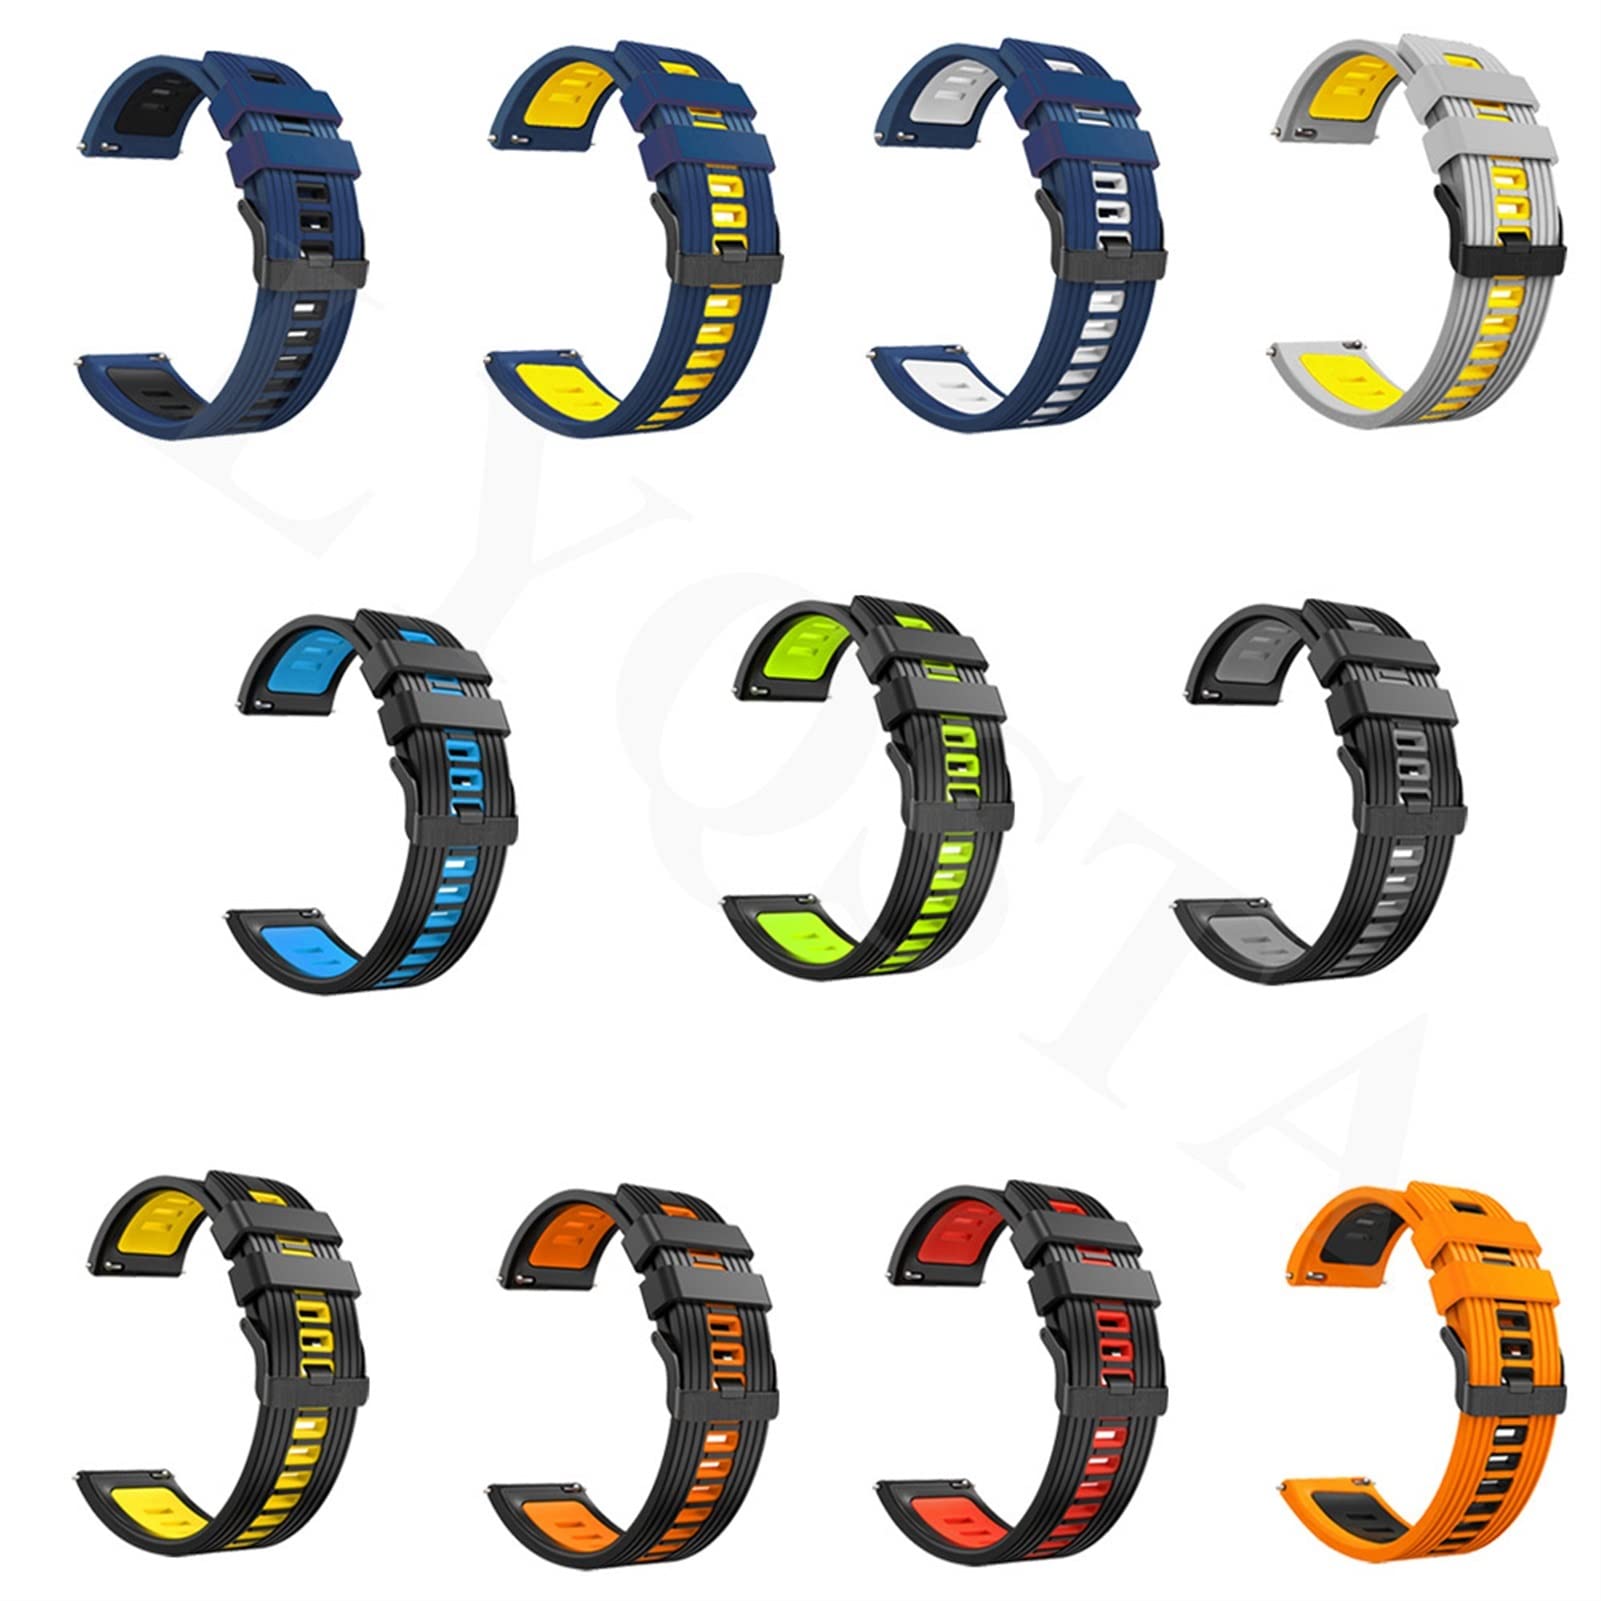 COOVS Silicone Band Strap for Huawei Watch GT3 GT Runner 46mm Original Watchband 22mm Universal Replacement Bracelet (Color : Style A, Size : 22mm Universal)